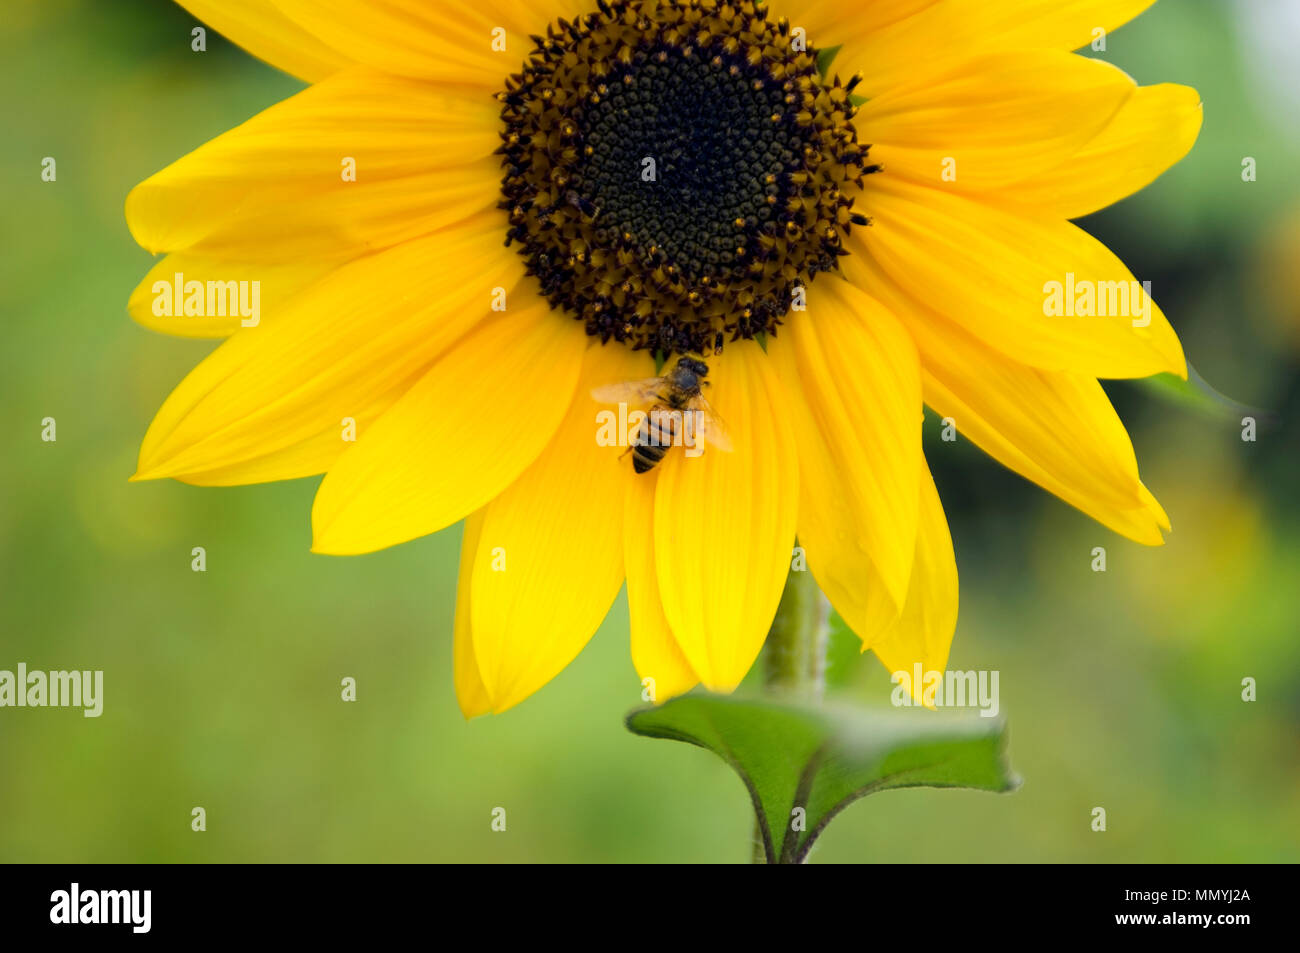 A bee partners with a sunflower in the course of pollination. Stock Photo